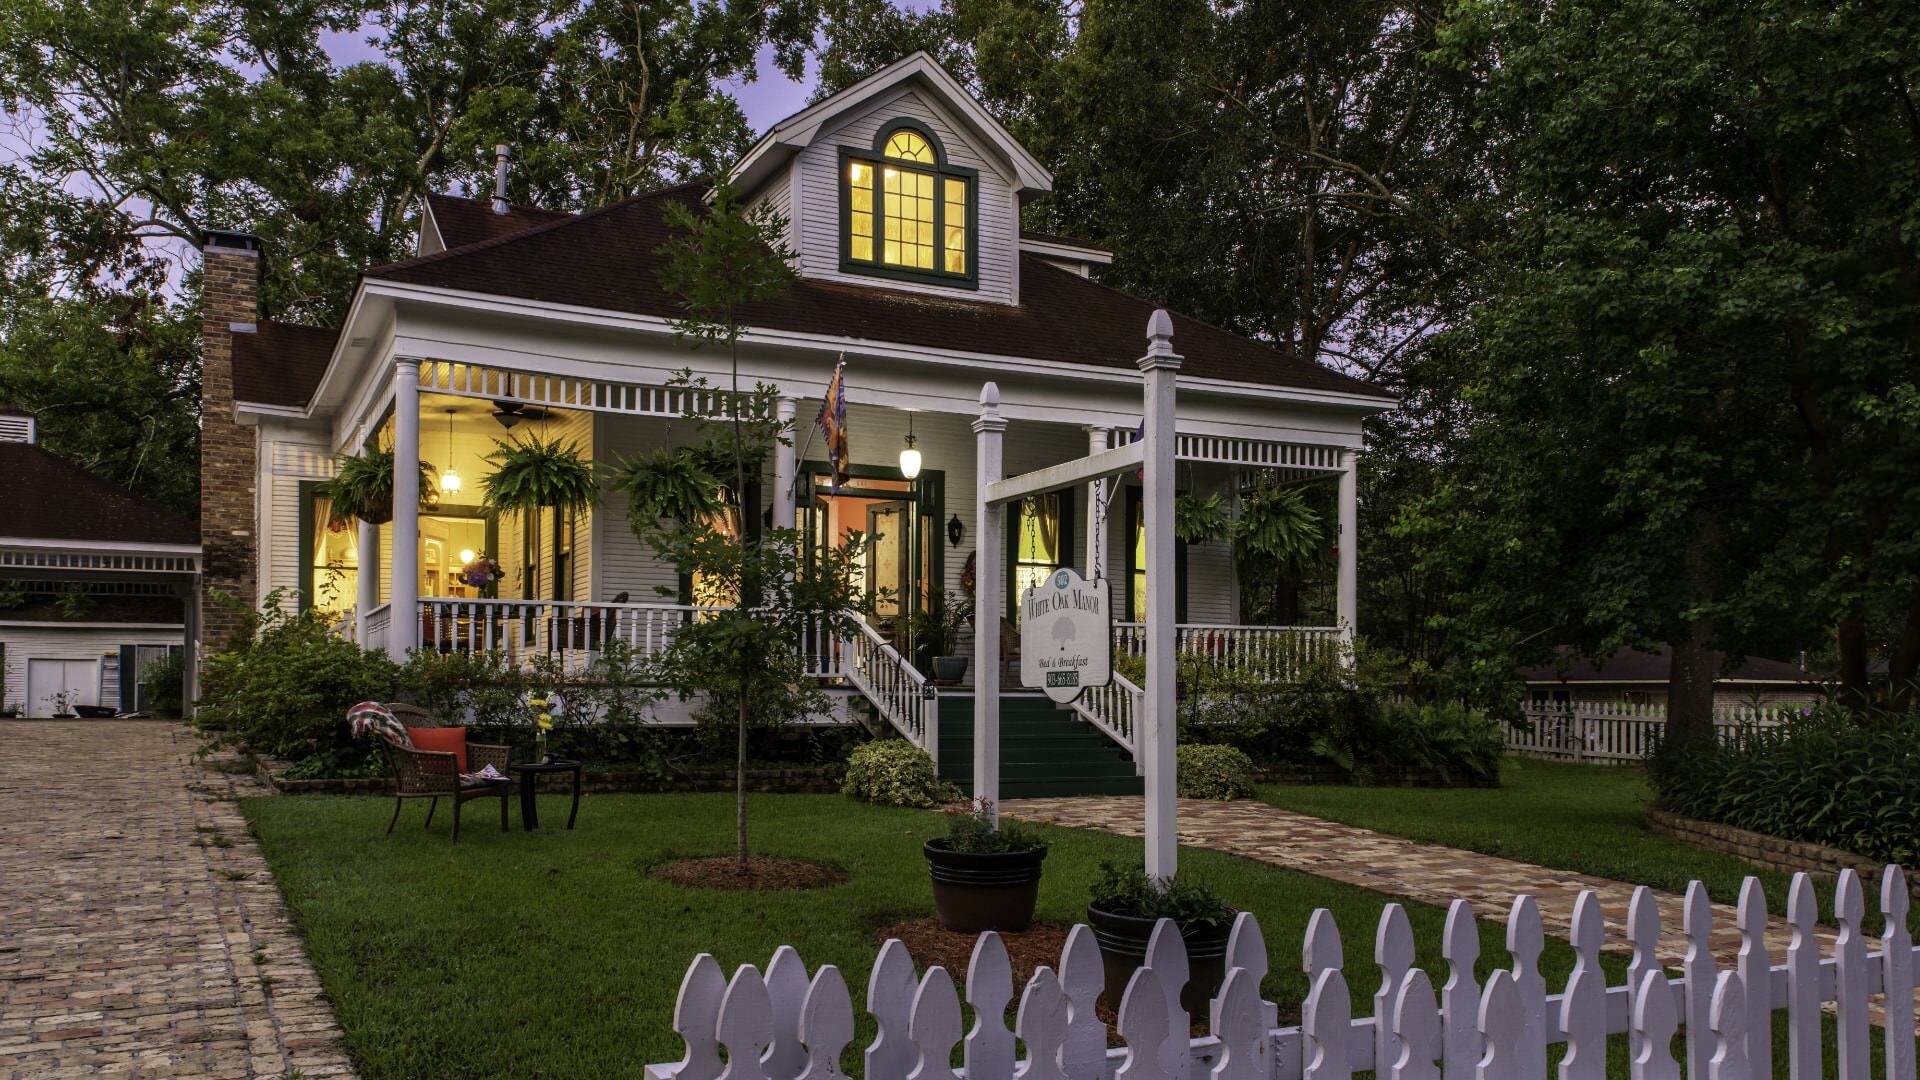 Exterior view of a property painted white with white trim, wrapped front porch, white picket fence, green grass, and surrounded by large green trees